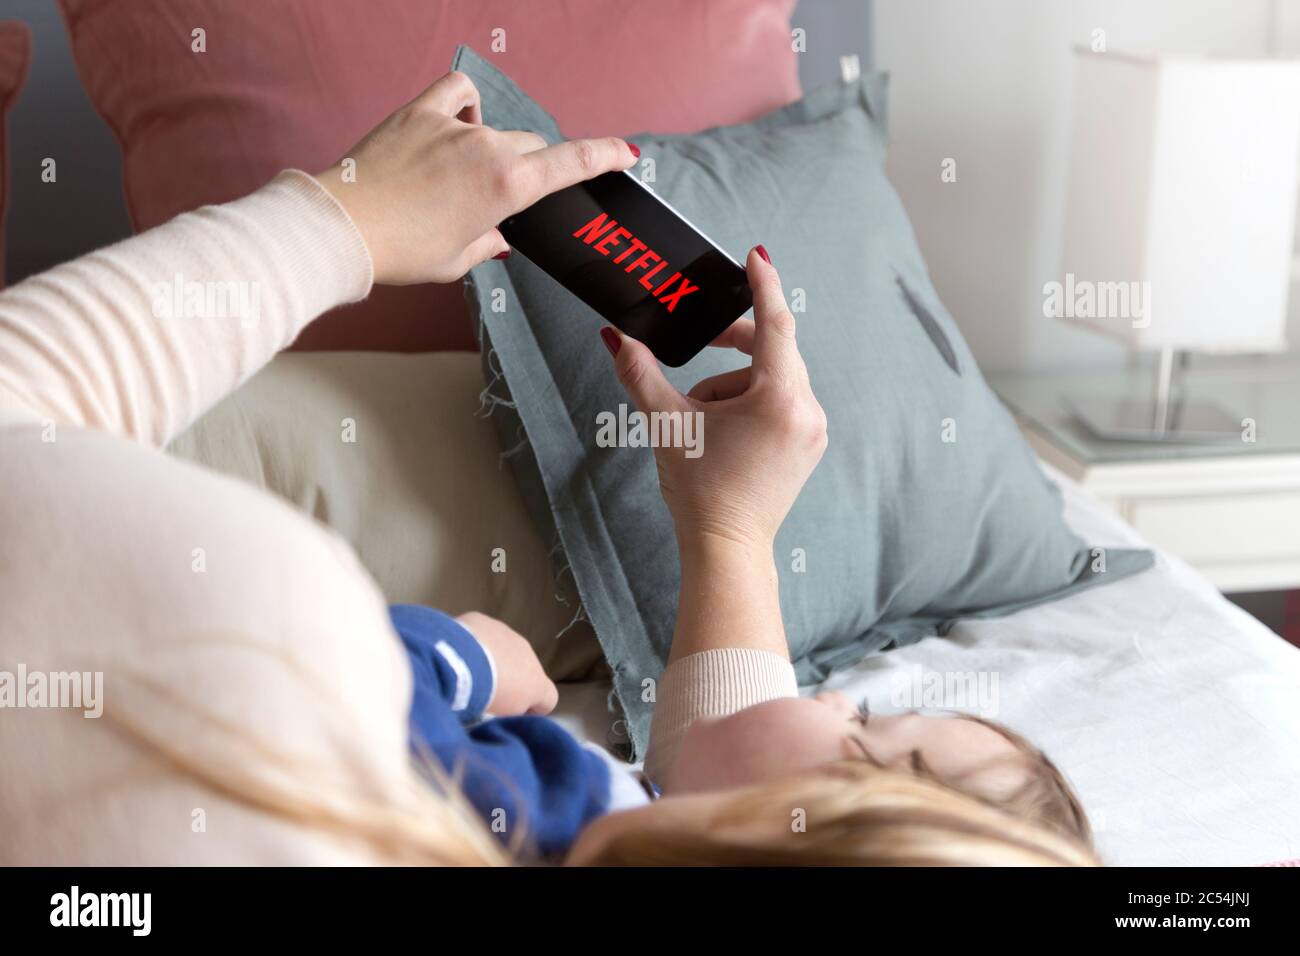 ROSARIO, SANTA FE, ARGENTINA - SEPTEMBER 2, 2019: Woman with her son watching a cell phone with netflix logo on screen. Stock Photo